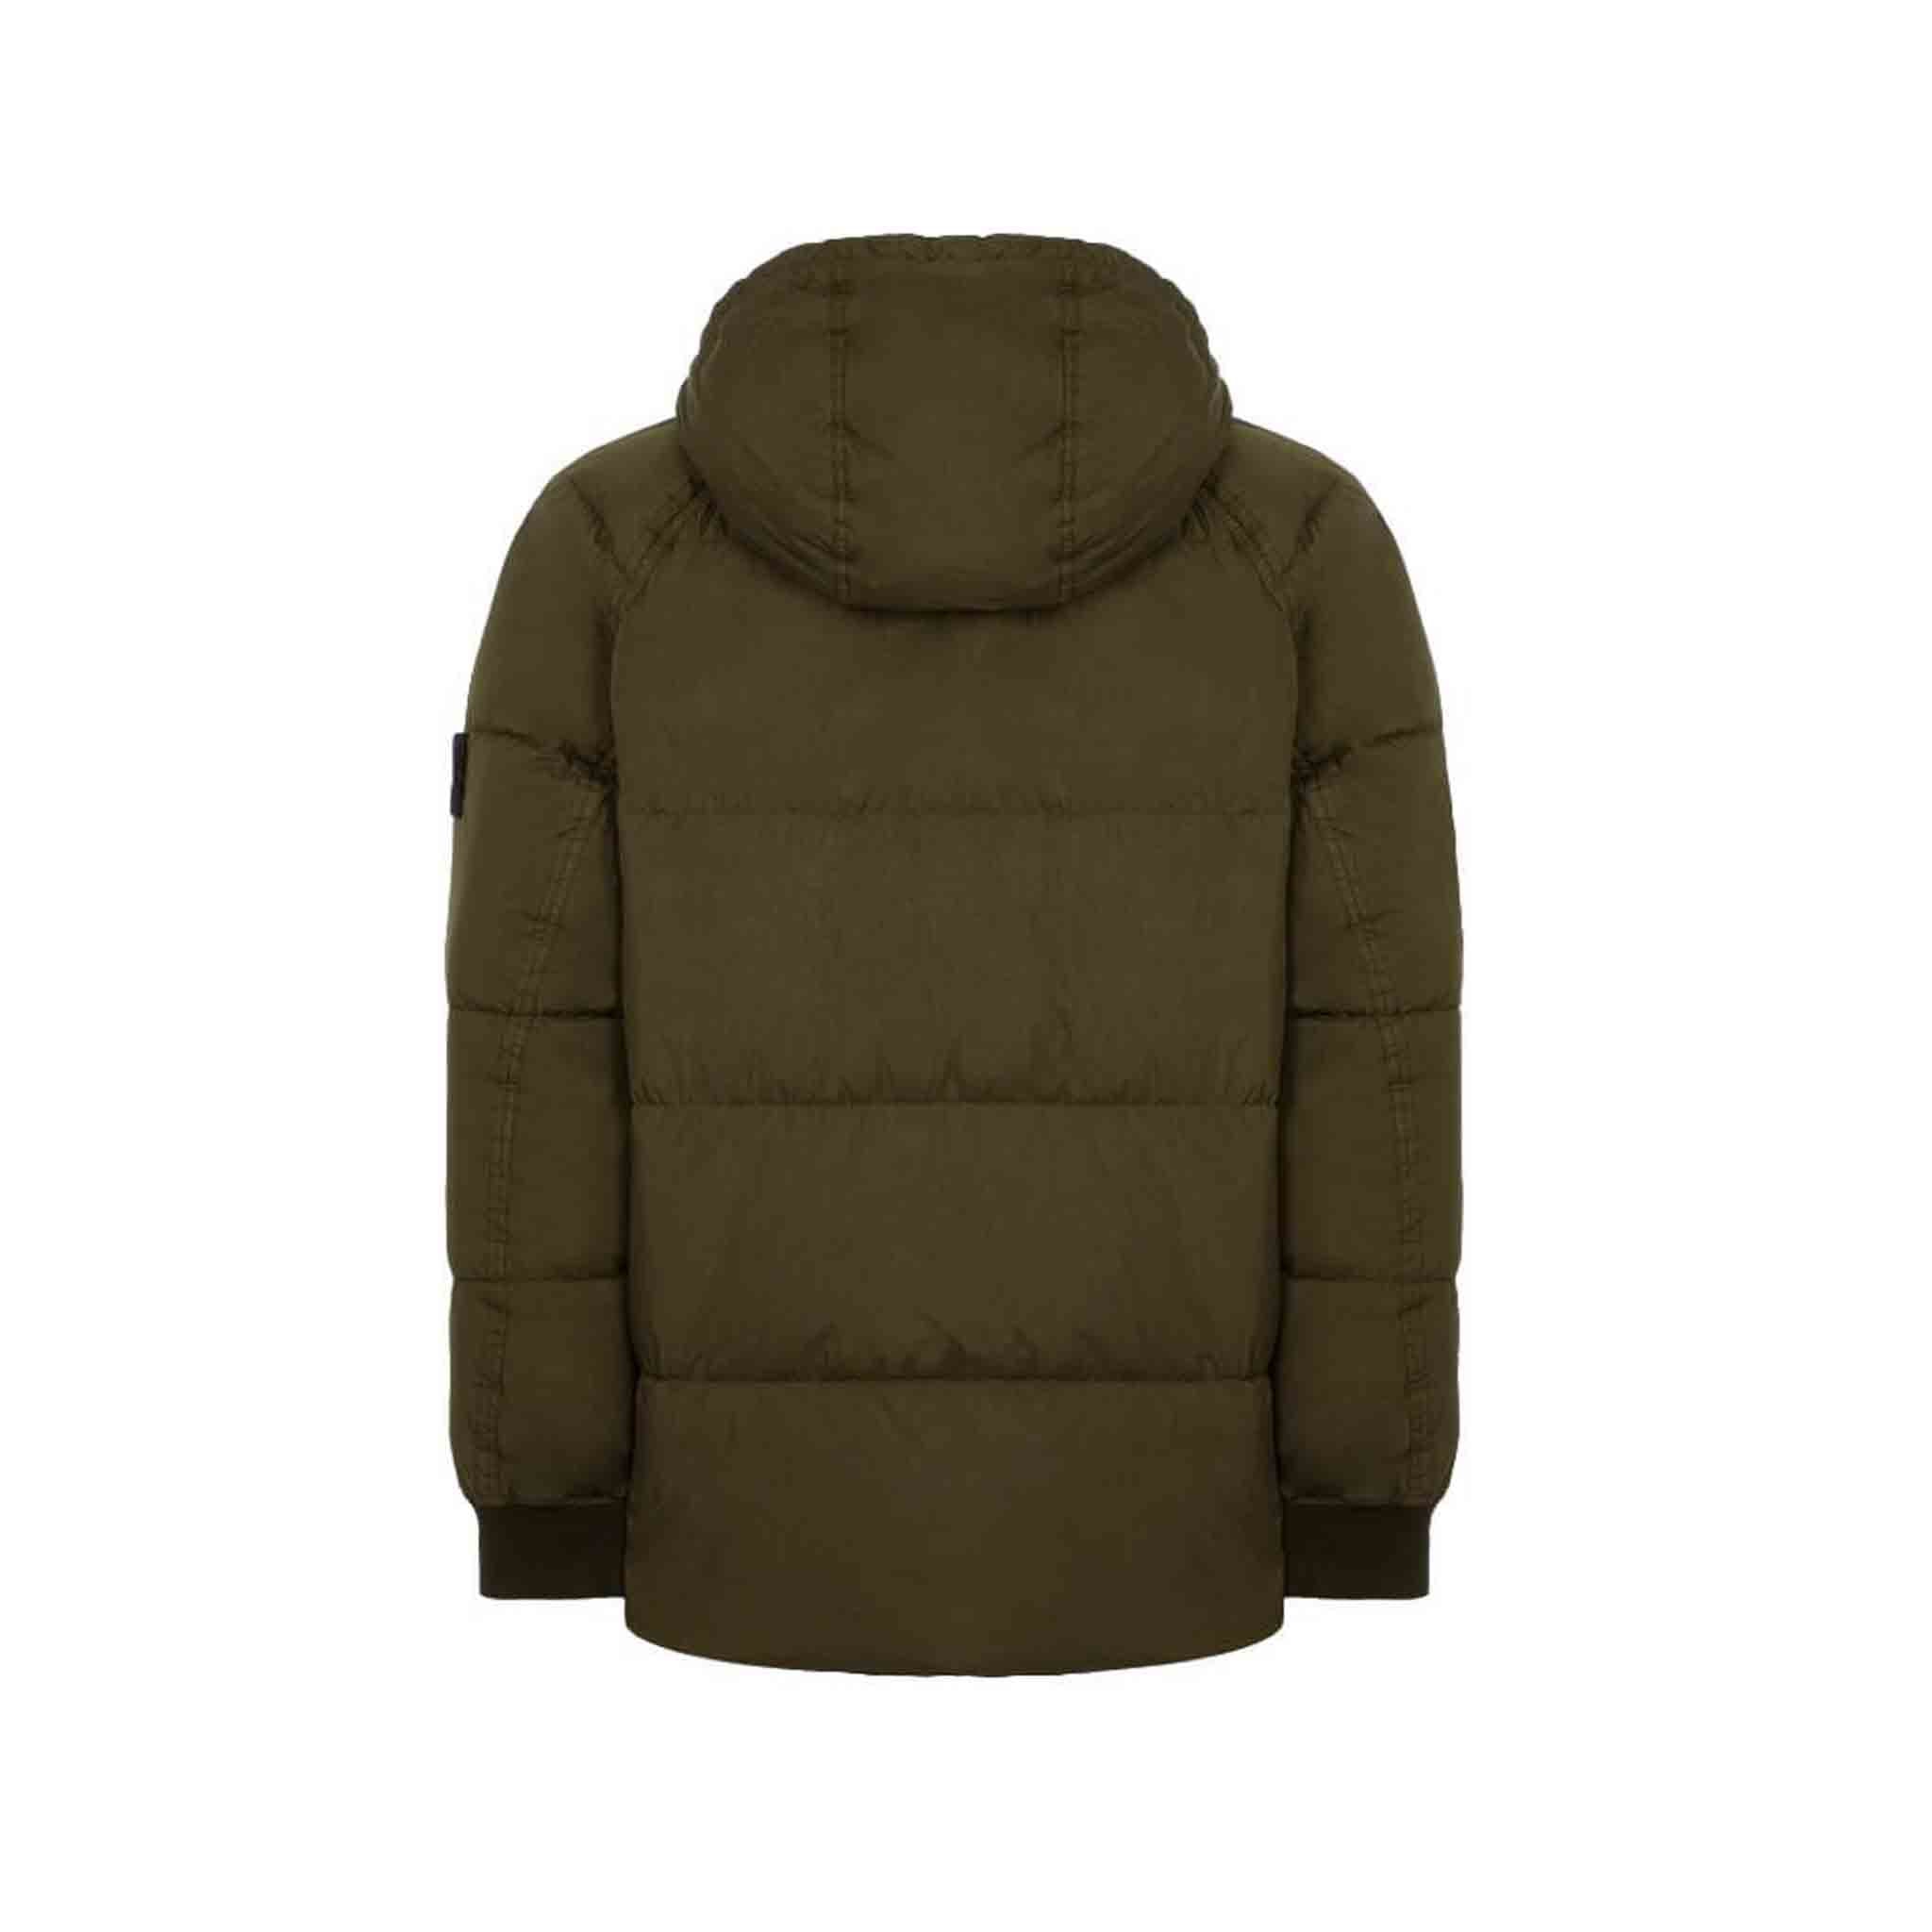 Stone Island Garment Dyed Crinkle Reps Quilted Down Jacket in Olive Green